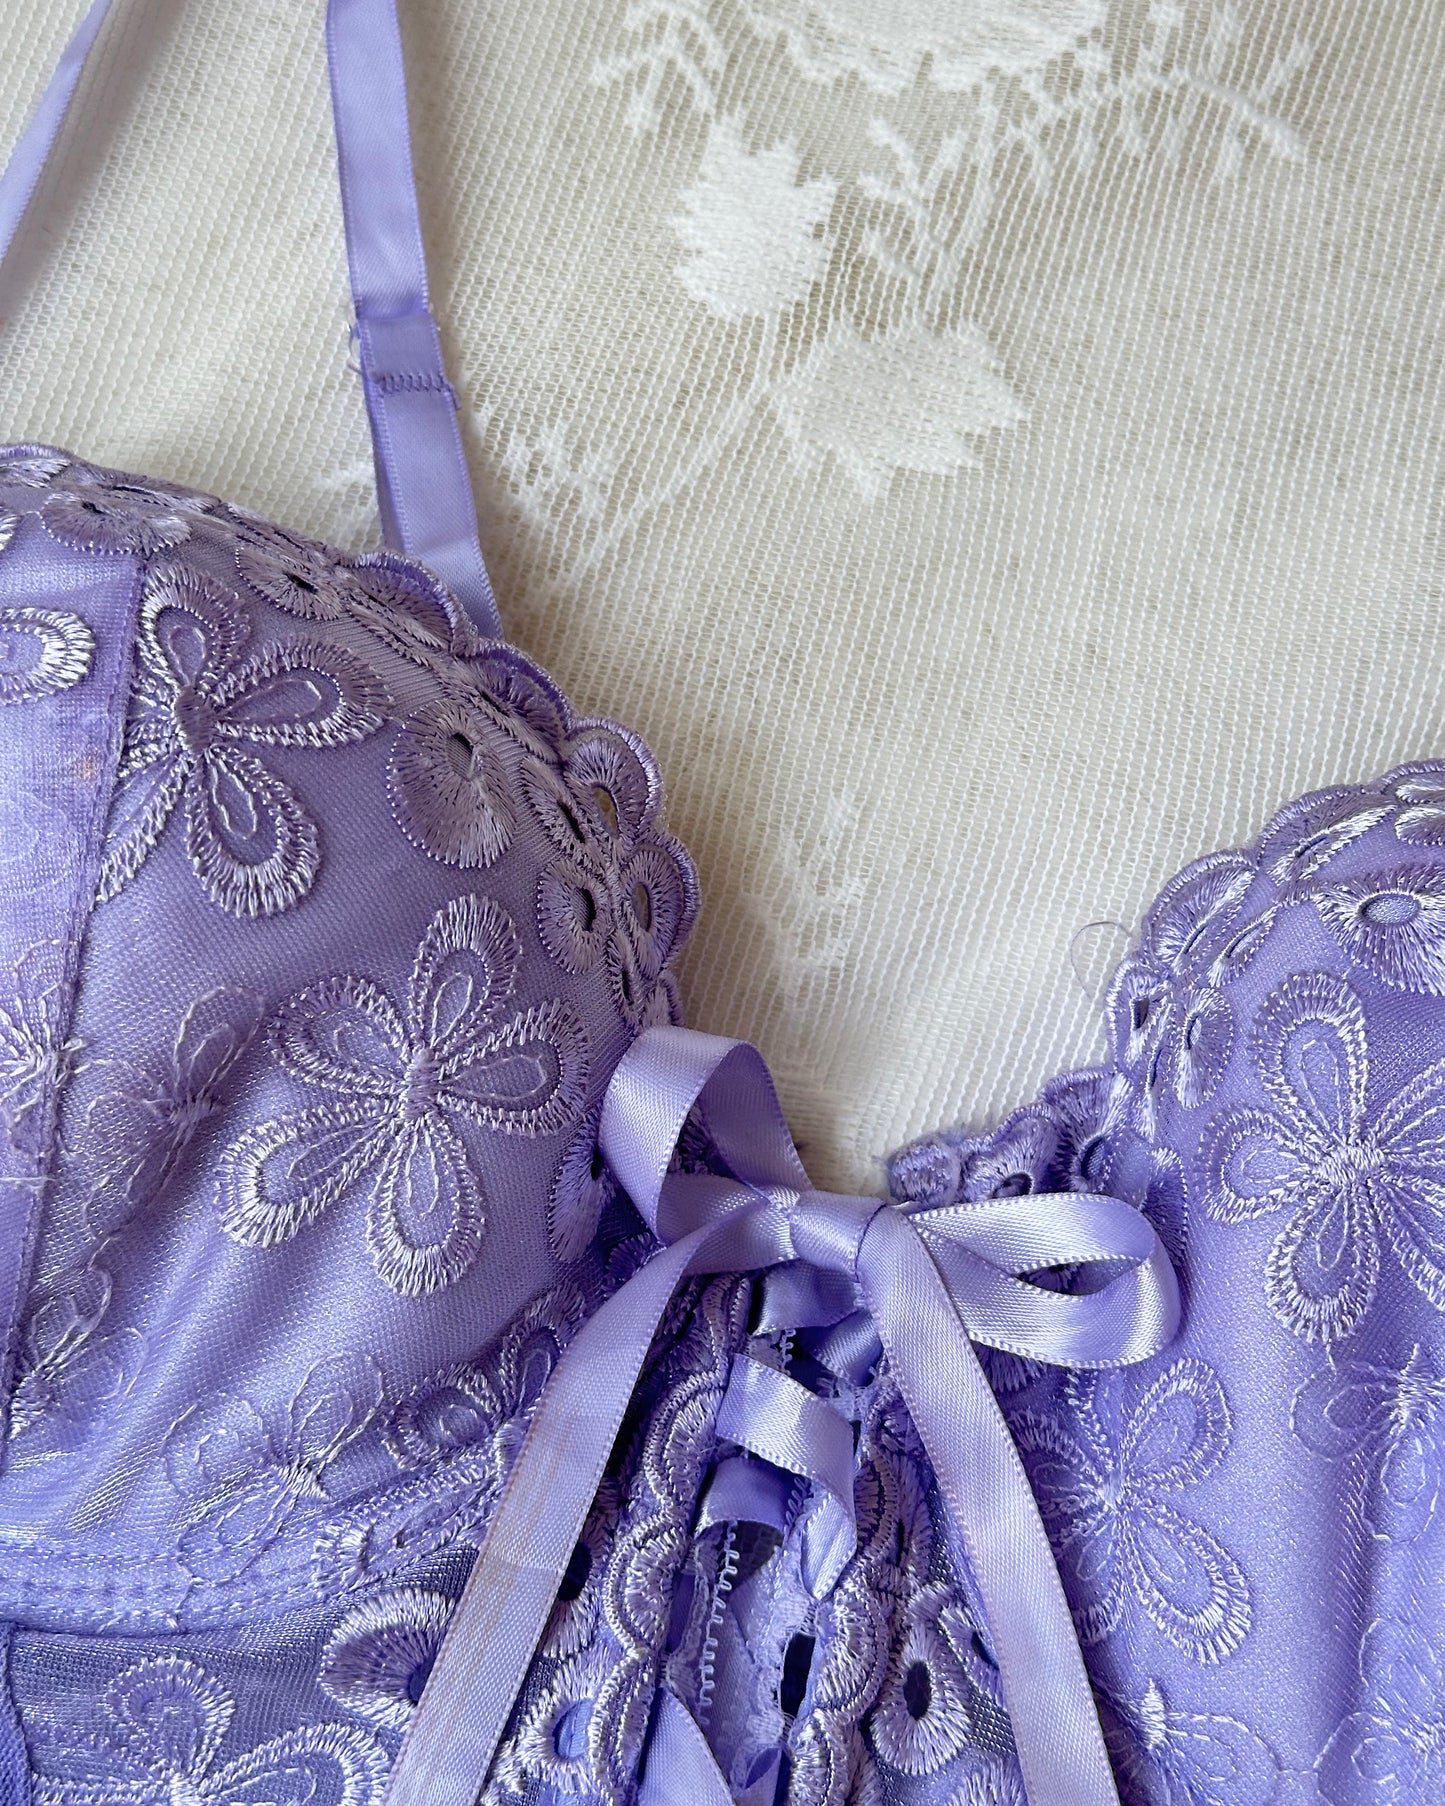 Lovely Lavender Slip Set includes a Bustier Corset and Matching Thongs